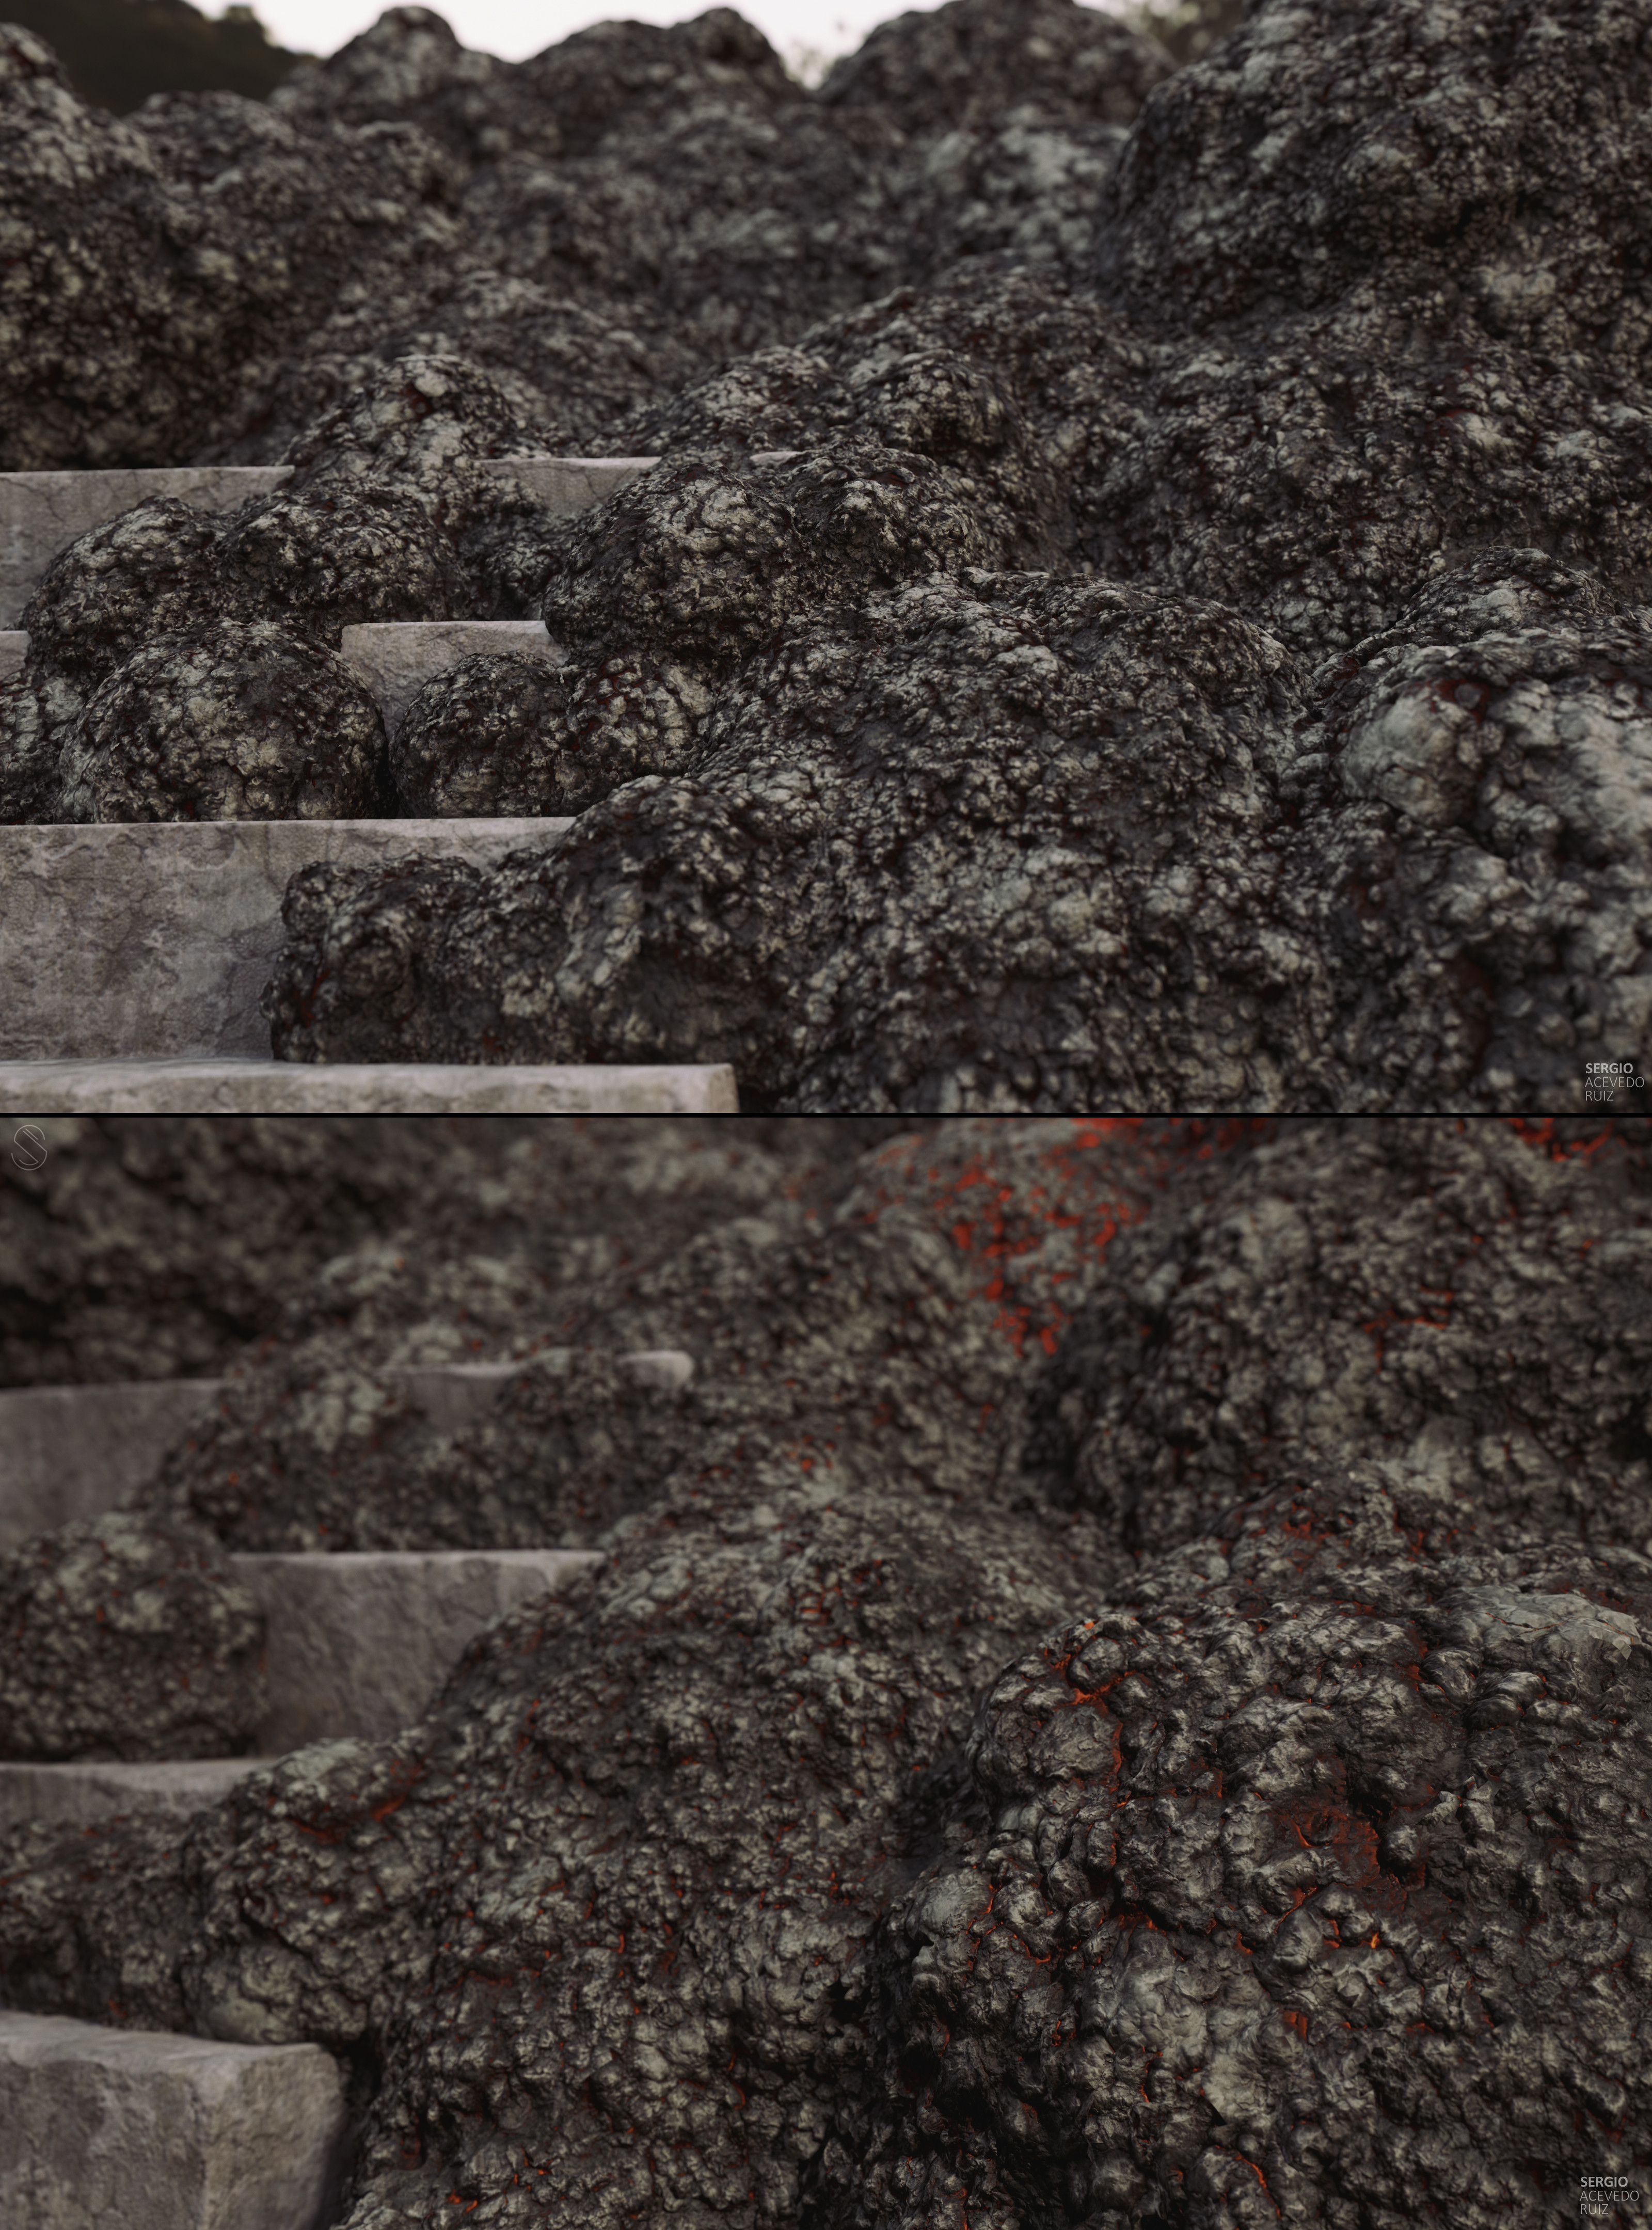 Lava accumulated in stairs mesh